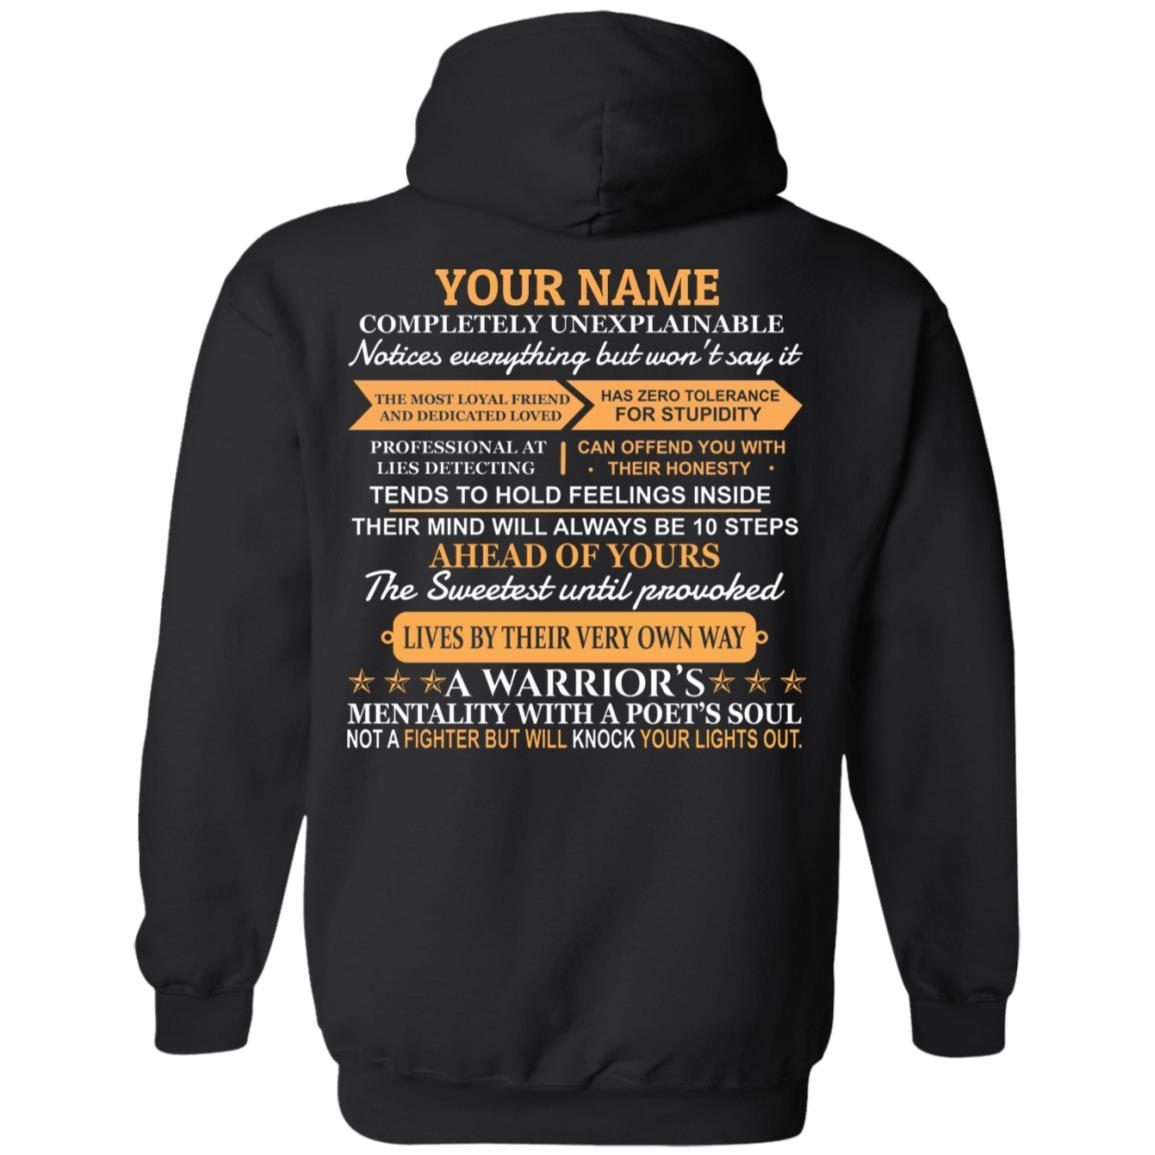 Custom name completely unexplainable notices everything but won’t say it shirt 2